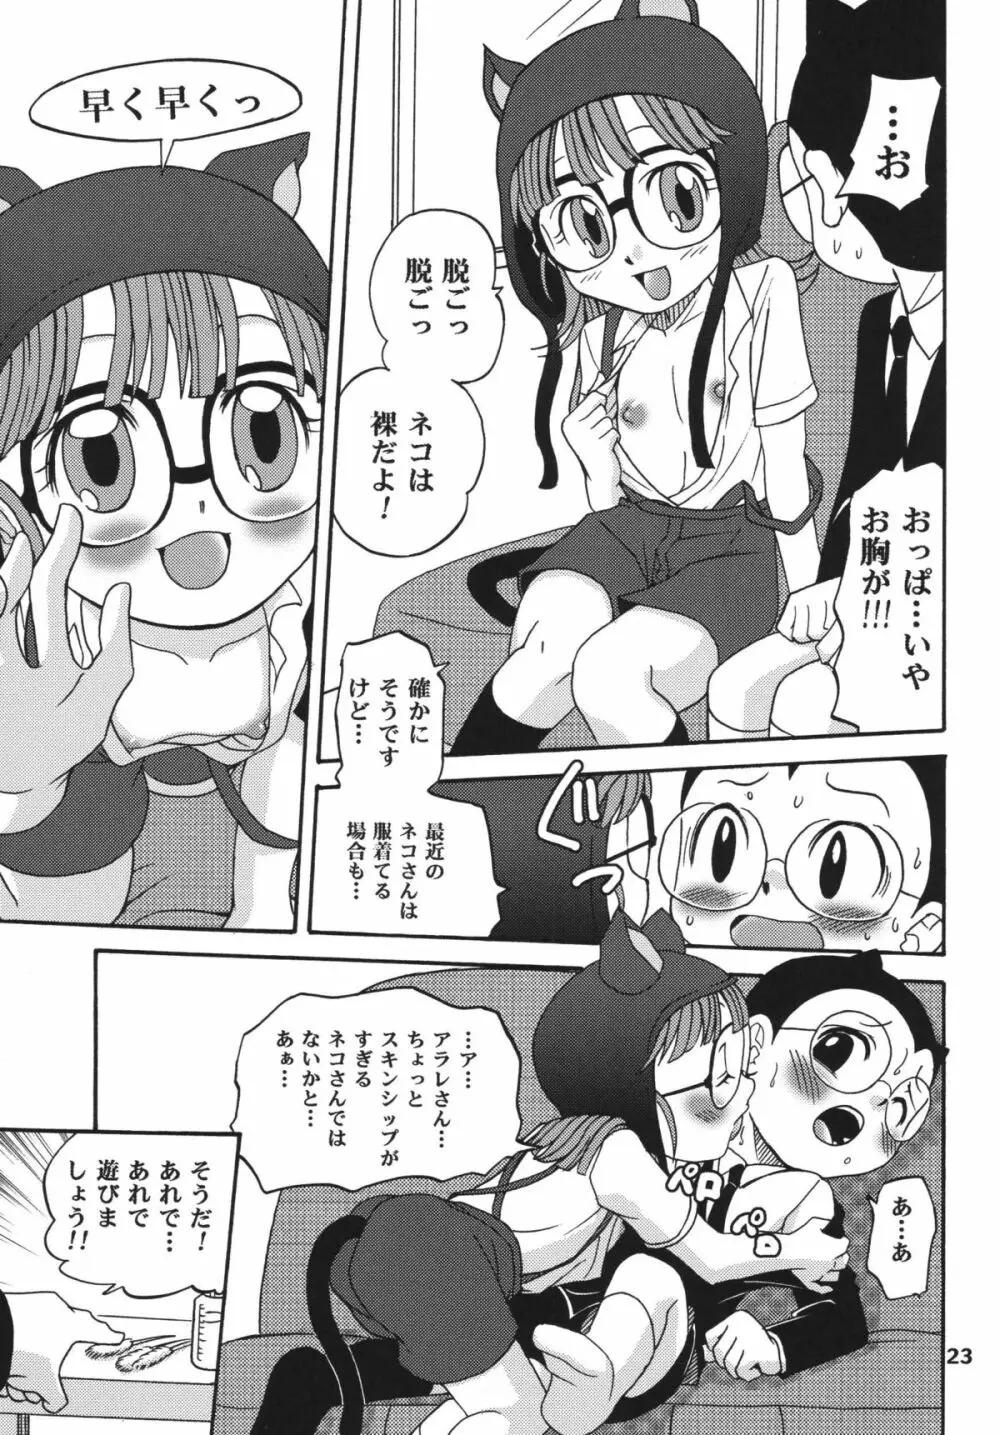 PROJECT ARALE 2 - page23